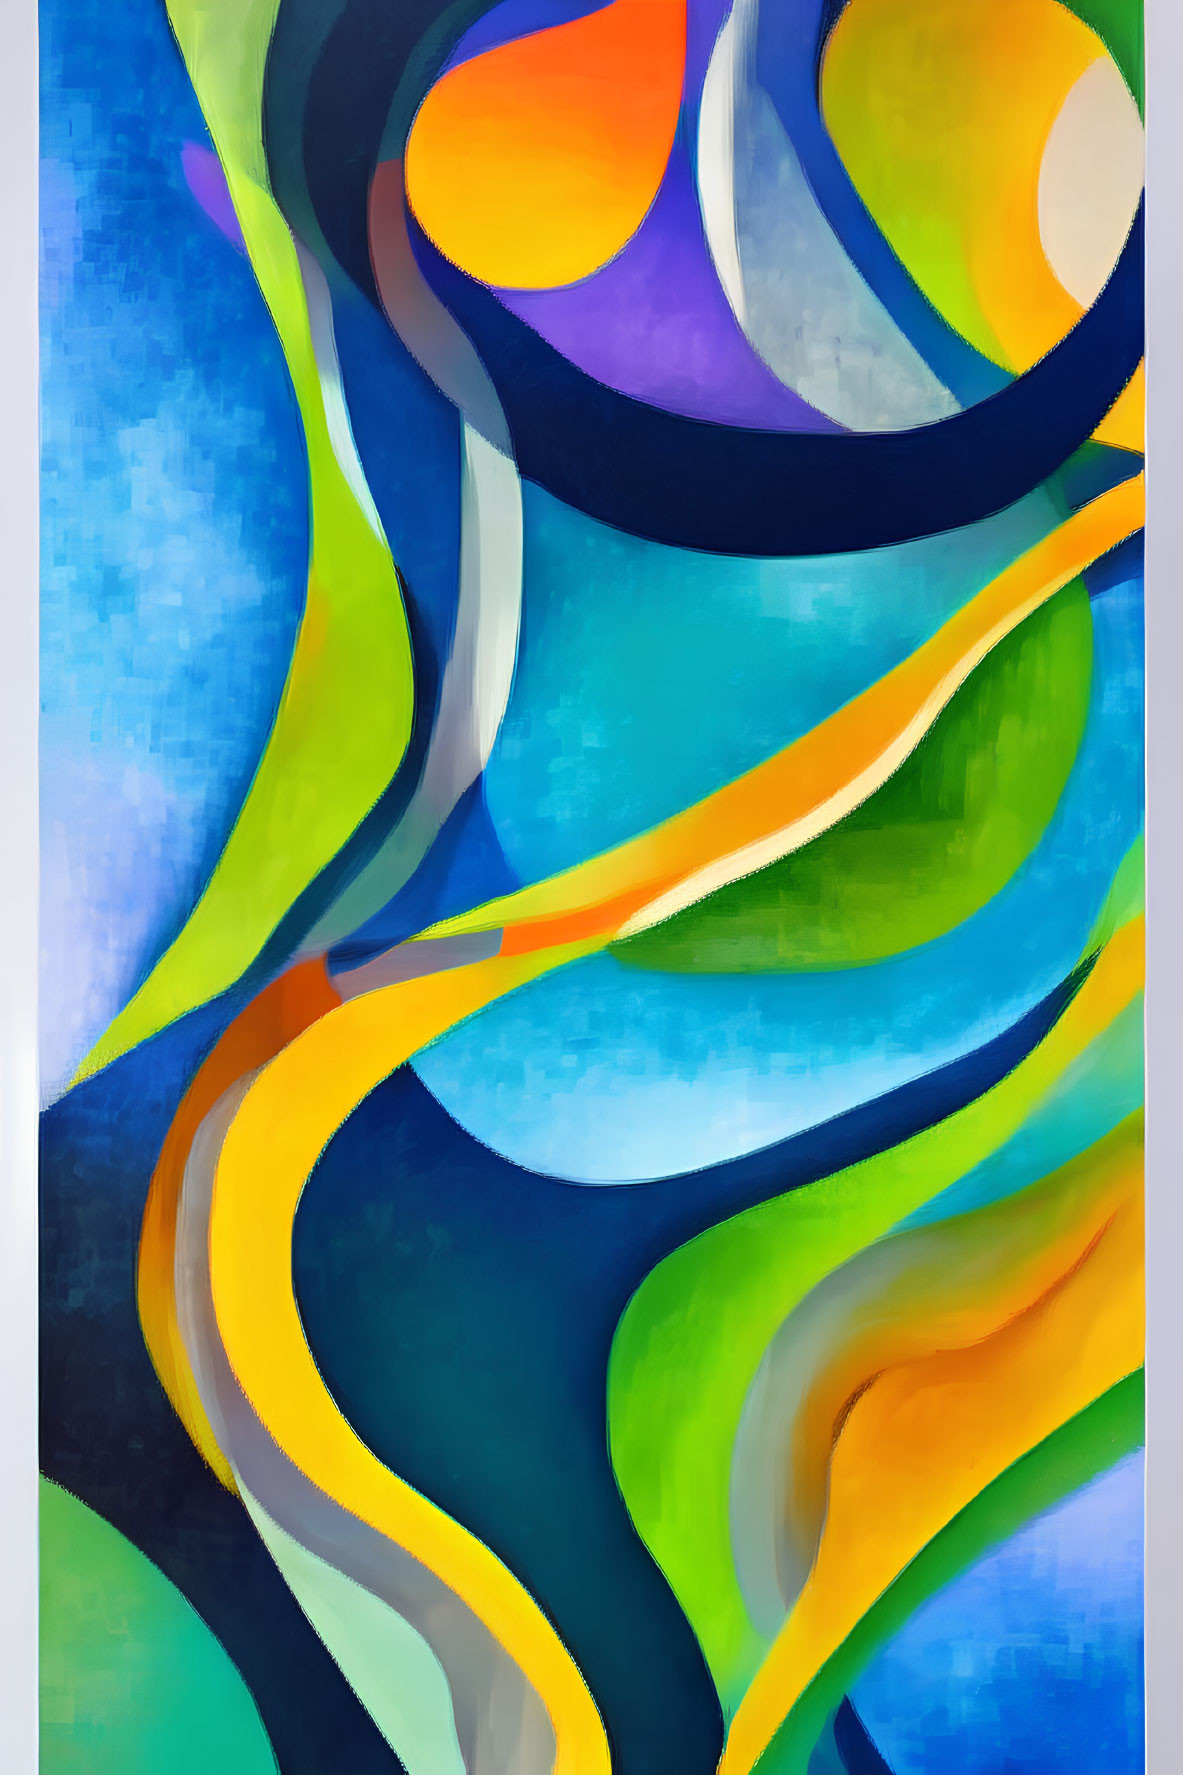 Vibrant abstract painting with undulating shapes in blue, orange, yellow, green, and purple